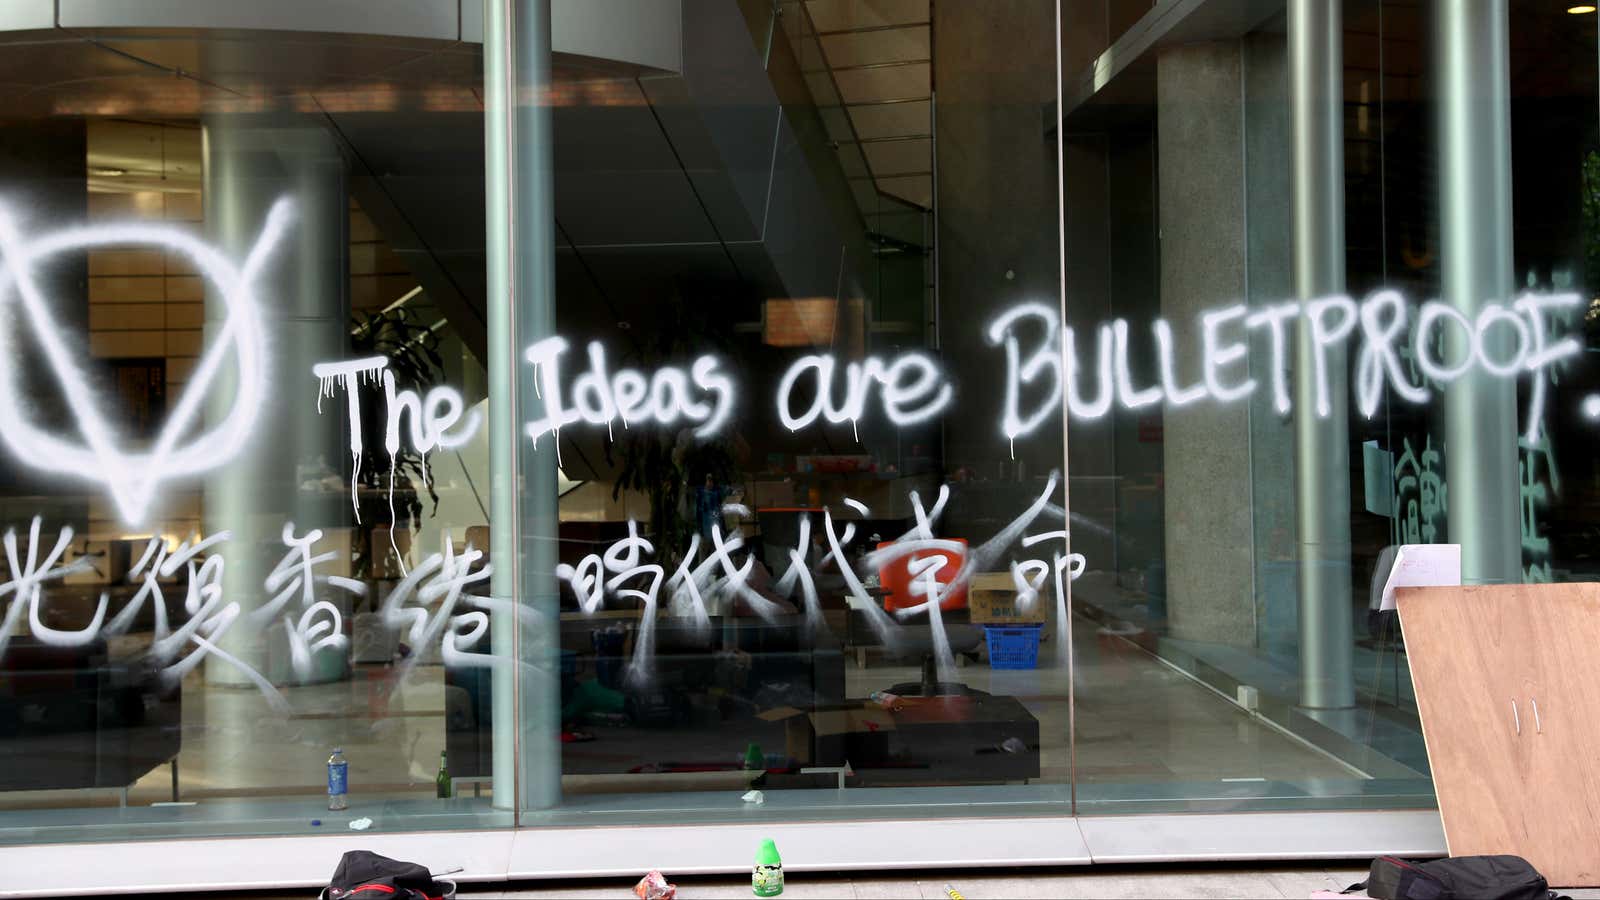 The Hong Kong protests have a message.